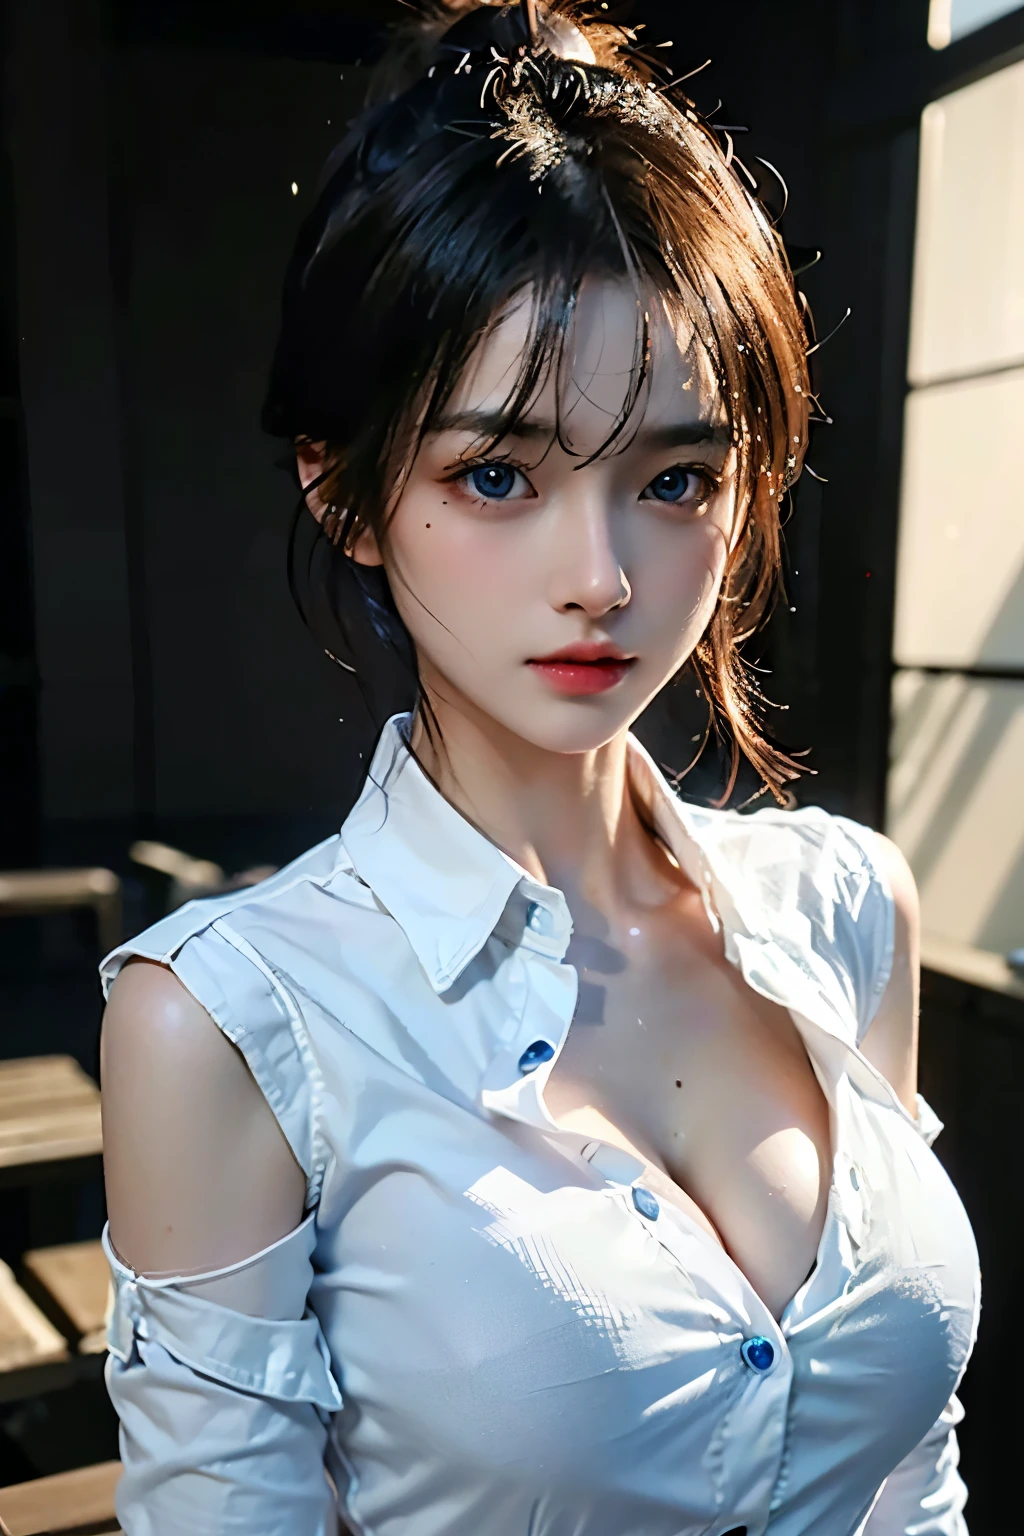 Ultra-high resolution,Tabletop,Highest quality, ,Perfect Glowing Skin,Perfect lighting,Detailed lighting,Dramatic Shadows,Ray Tracing, One Girl,Upper Body,Wet White Button Up Shirt,View your viewers, Off the shoulder, Big Breasts, Exposed cleavage, blue eyes, Sharp Face, Sharp eyes,  cyber punk